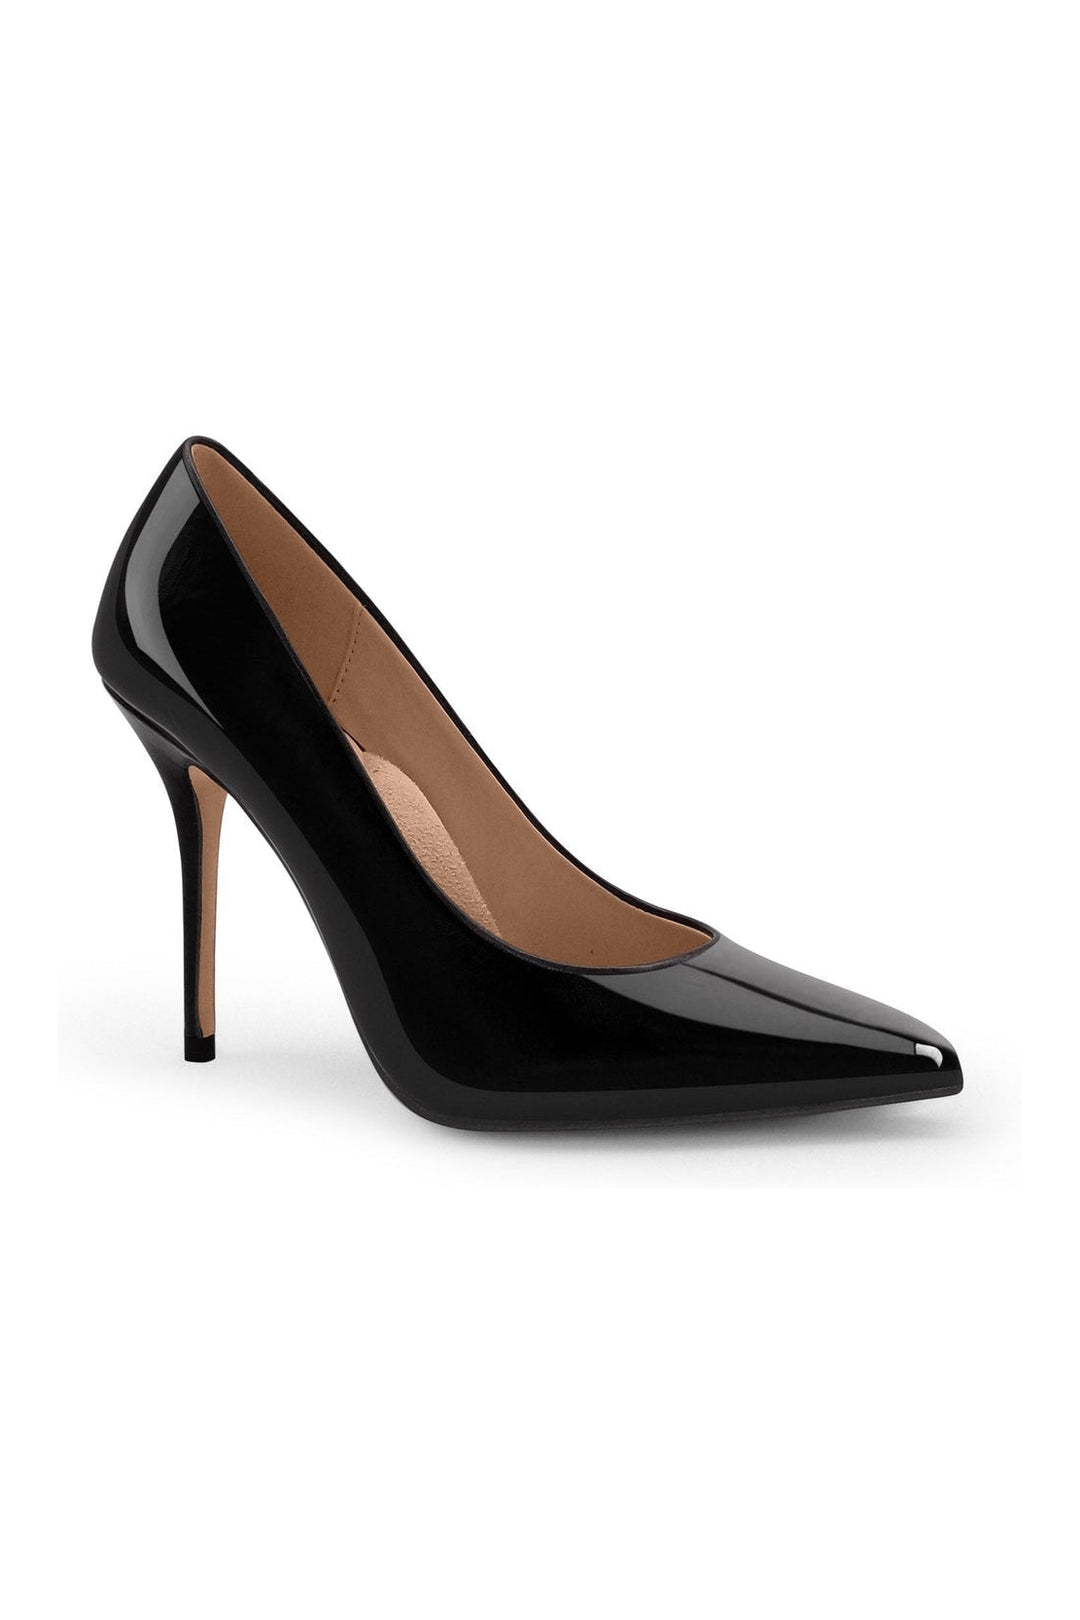 Super Sexy Classic Pump with Micro Stiletto Heel-Pumps-Sexyshoes Signature-Black-SEXYSHOES.COM